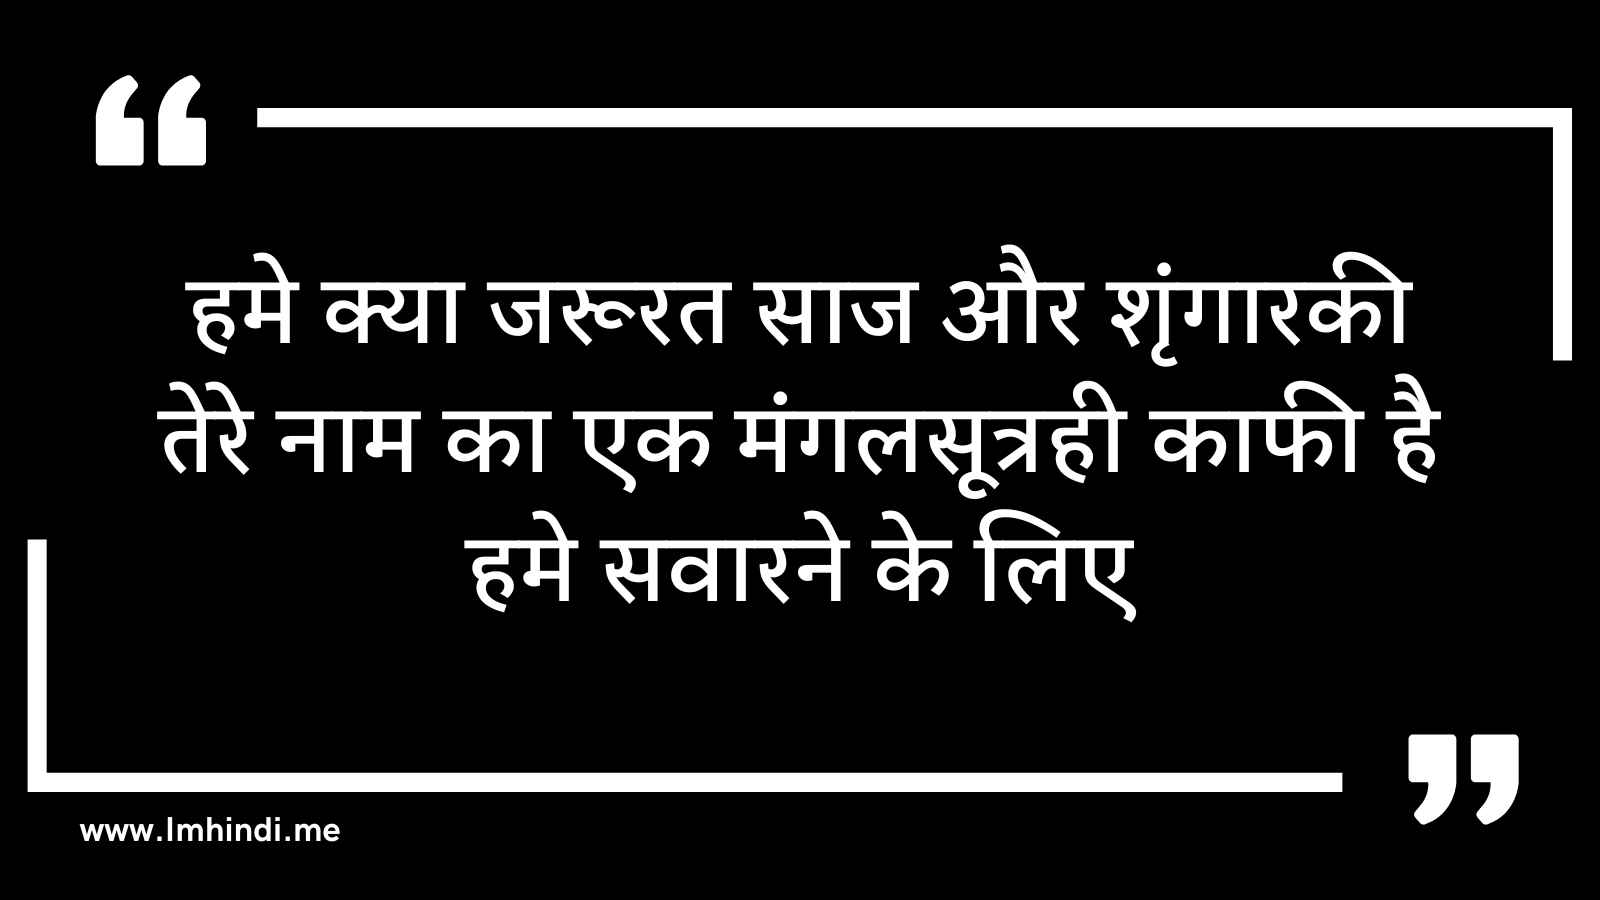 59+ MangalSutra Quotes in Hindi | Best मंगलसूत्र ...